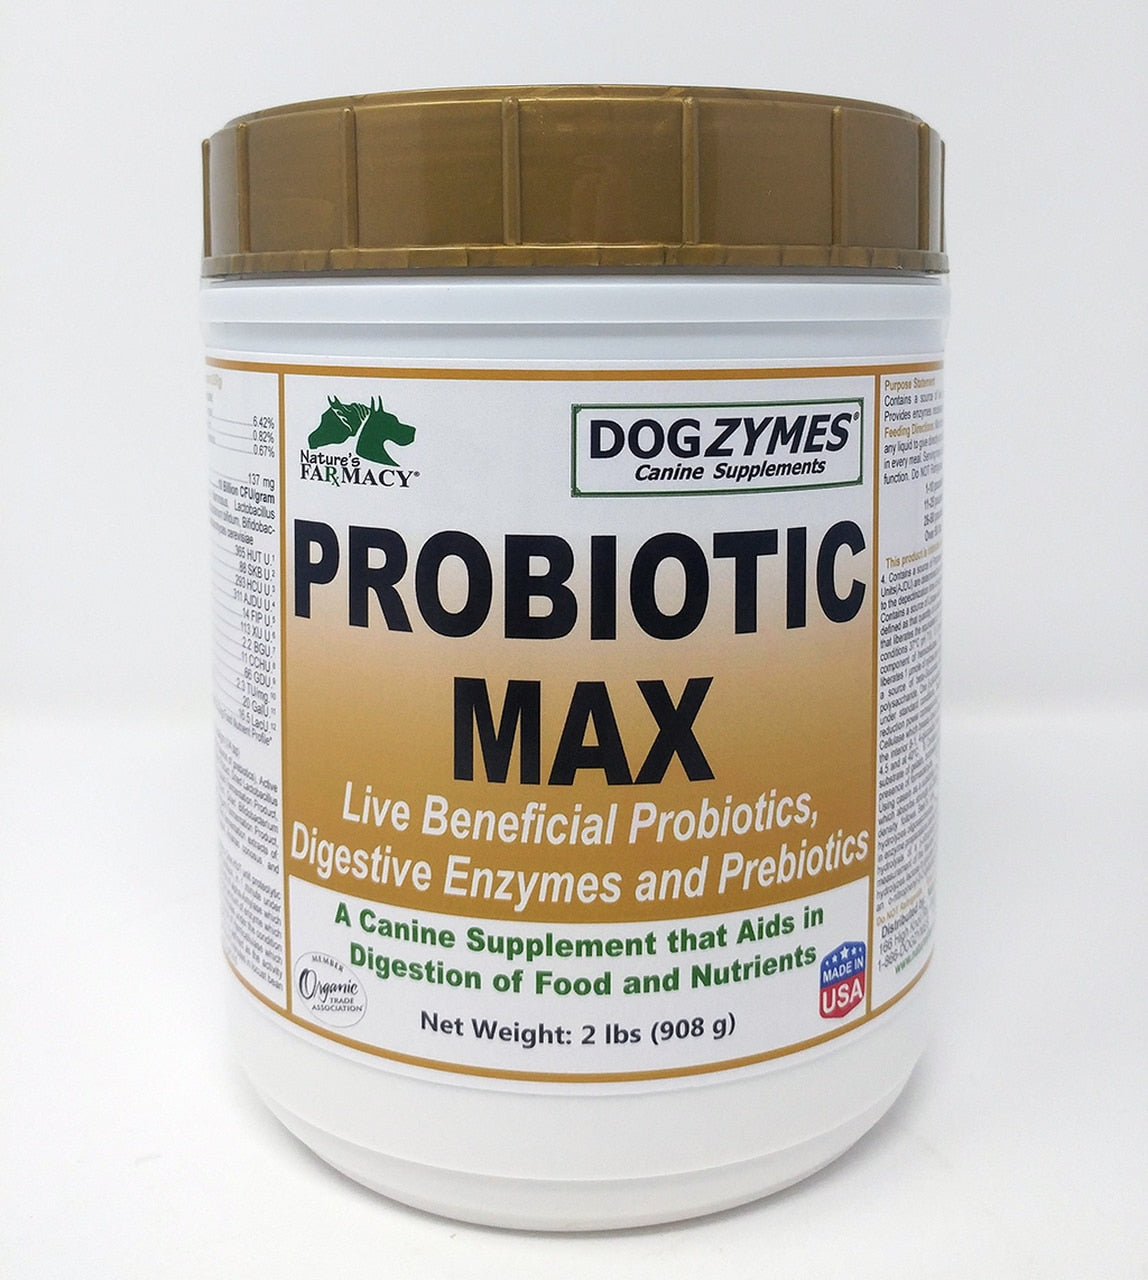 Nature's Farmacy Dogzymes Pro Biotic Max Supplement For Dogs